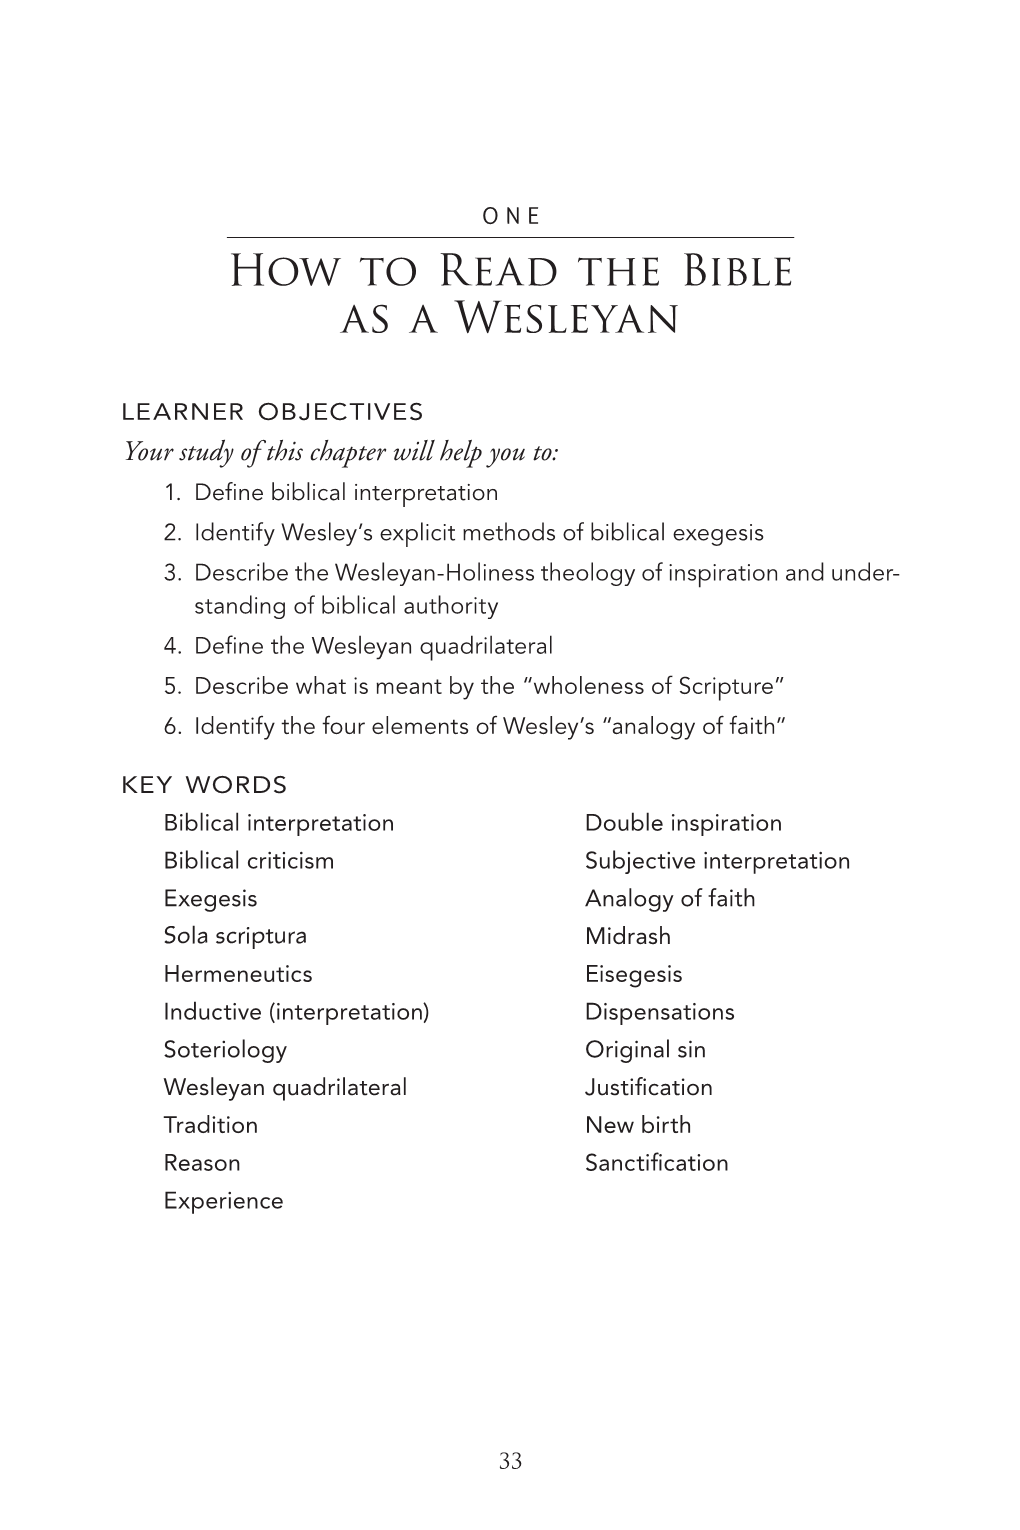 How to Read the Bible As a Wesleyan